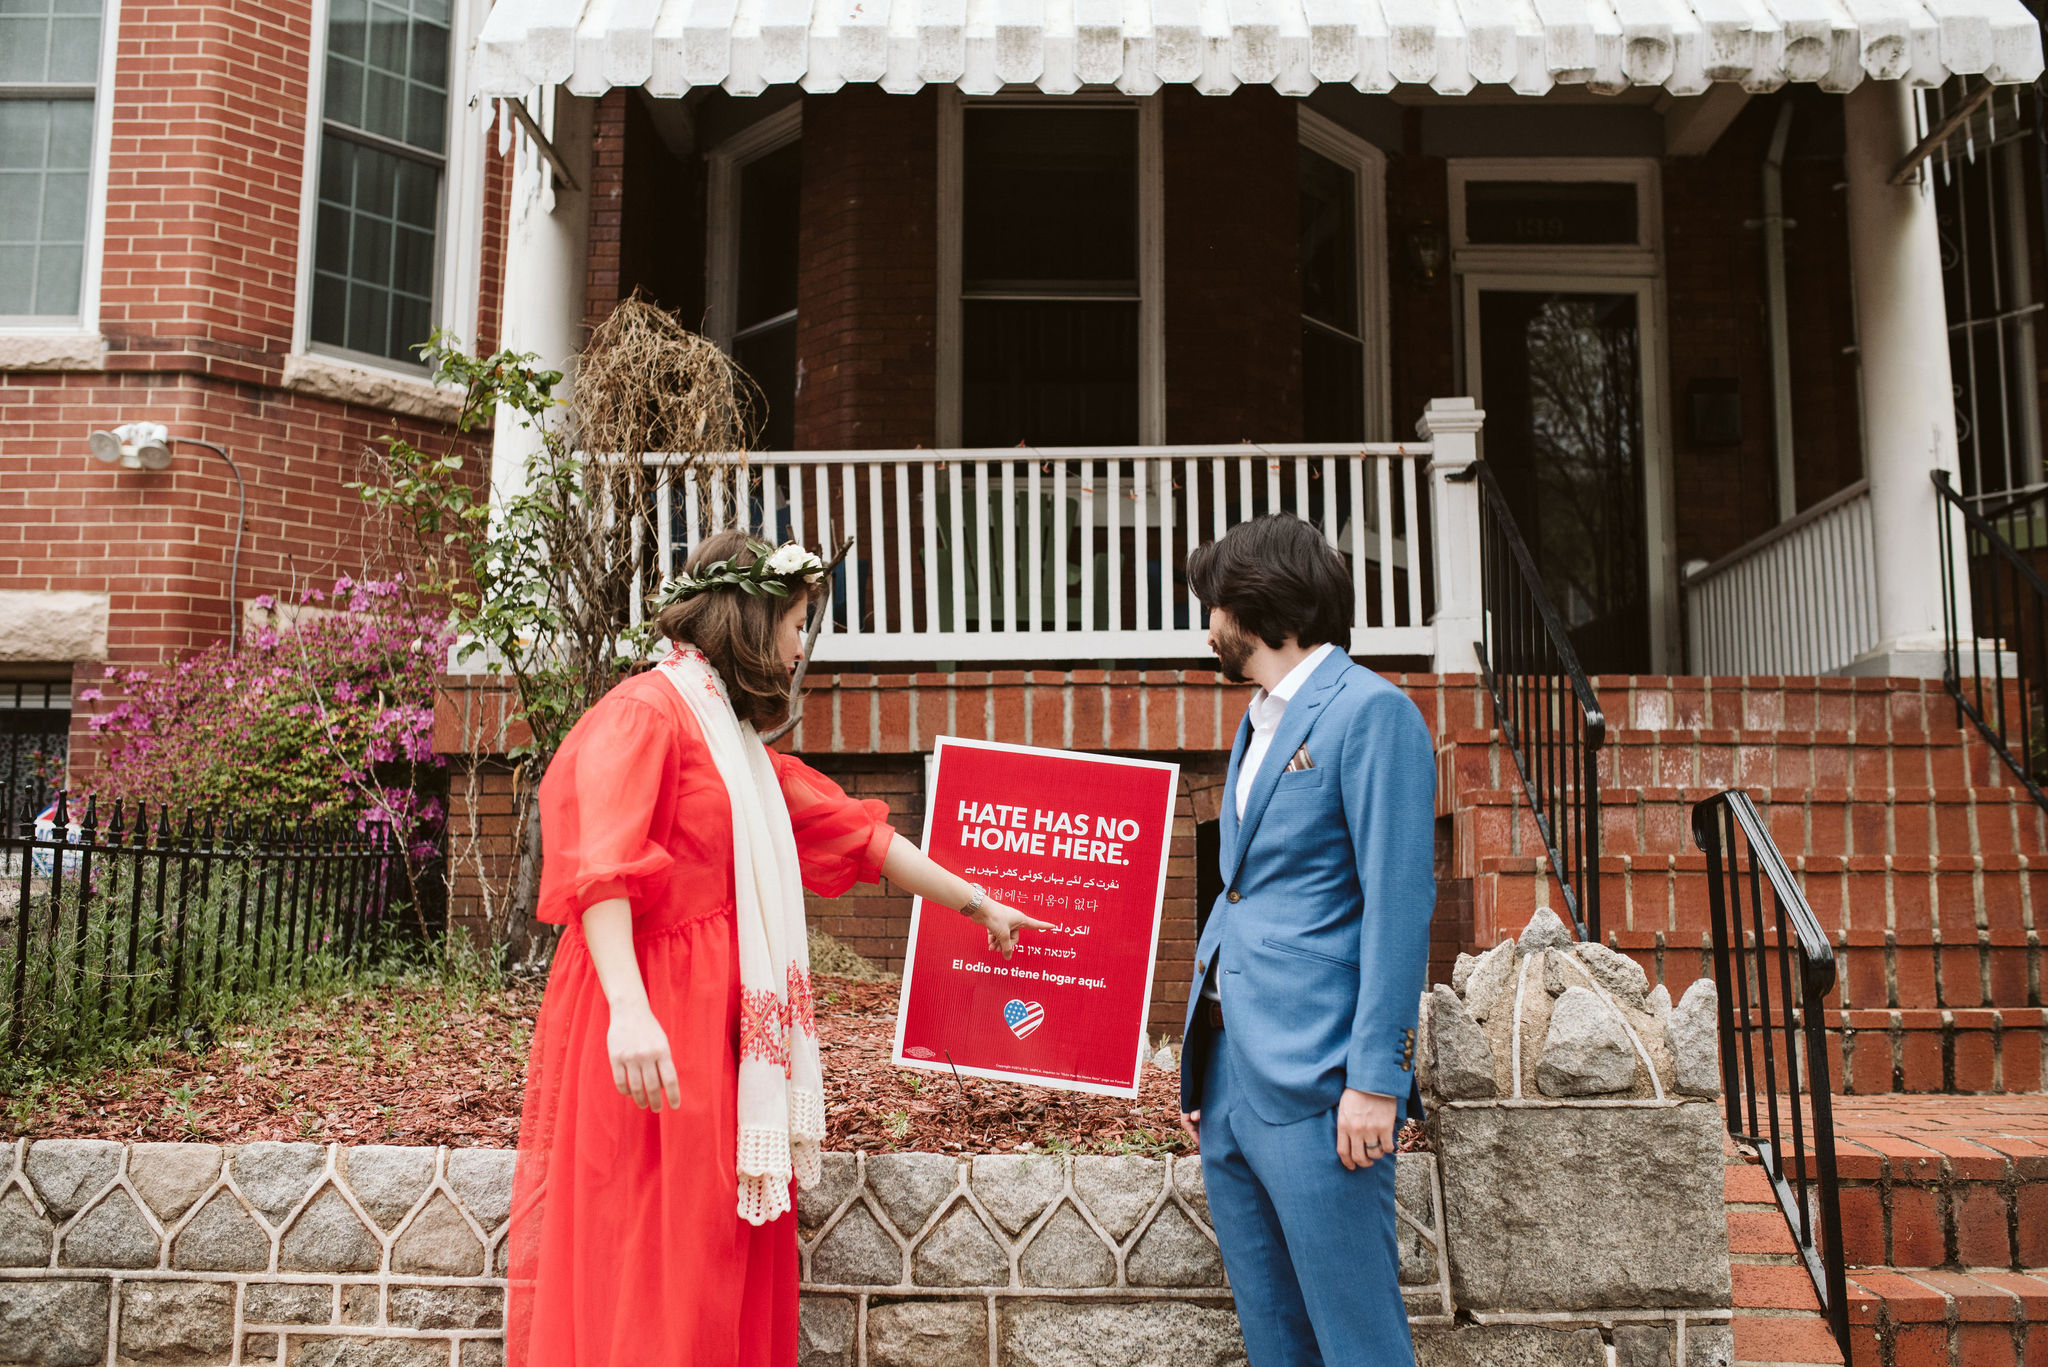  Washington DC, Baltimore Wedding Photographer, Spring, Intimate Wedding, Traditional, Classic, Palestinian, Turkish Design, Bride and Groom Pointing Out Yard Sign, No Hate, Red Dress 